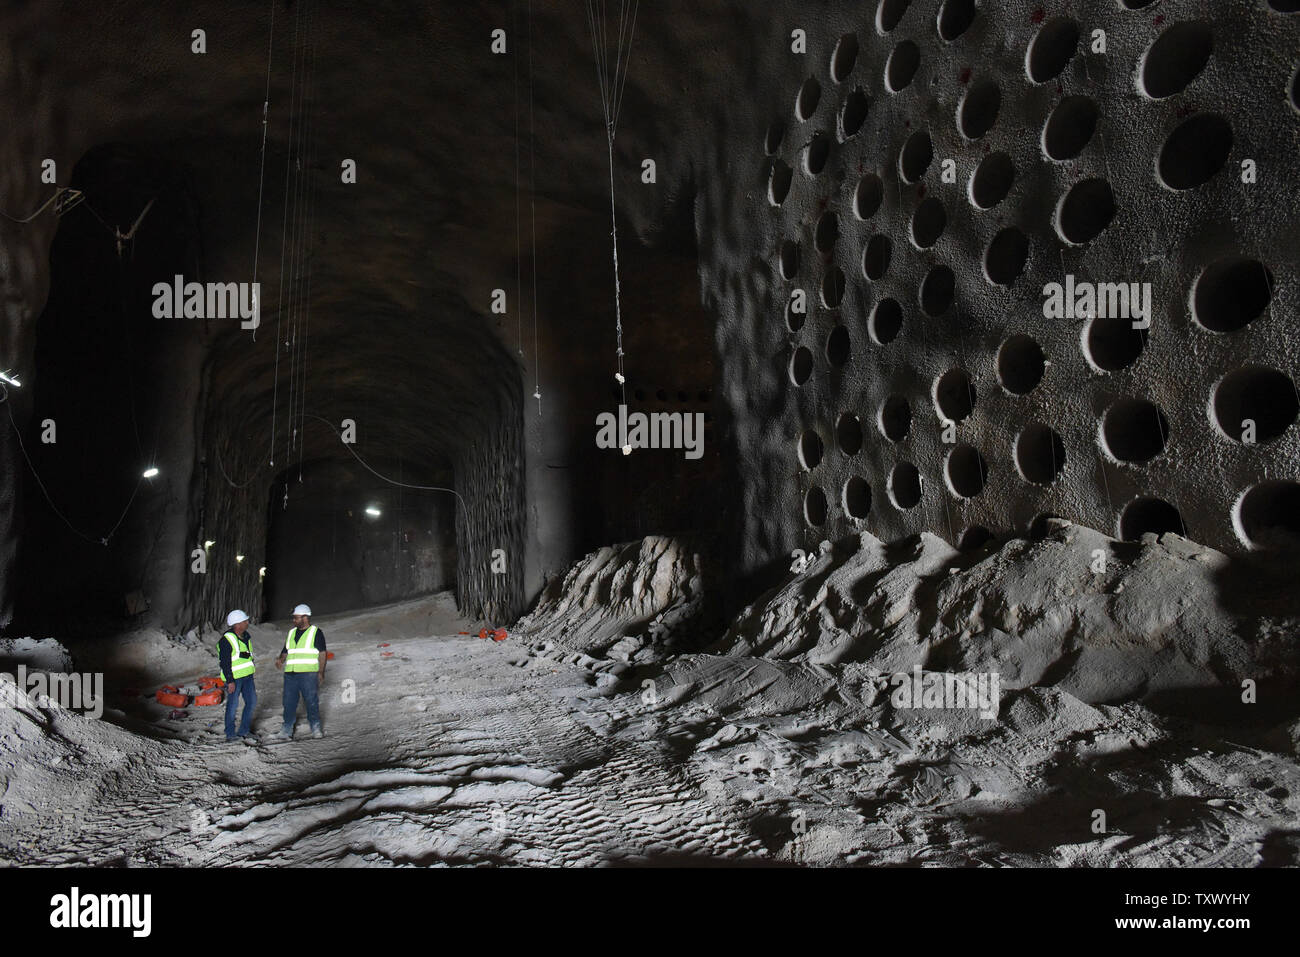 Israelis stand near partially constructed catacomb burial plots in the underground burial tunnels at the Givat Shaul Cemetery, Har HaMenuchot, in Jerusalem, Israel, November 26, 2017.  Due to overcrowding and lack of land for burial sites in Jerusalem, the religious burial society called Chevra Kadisha, is building the massive underground burial site that will provide space for more than 22,000 graves.   Photo by Debbie Hill/UPI Stock Photo